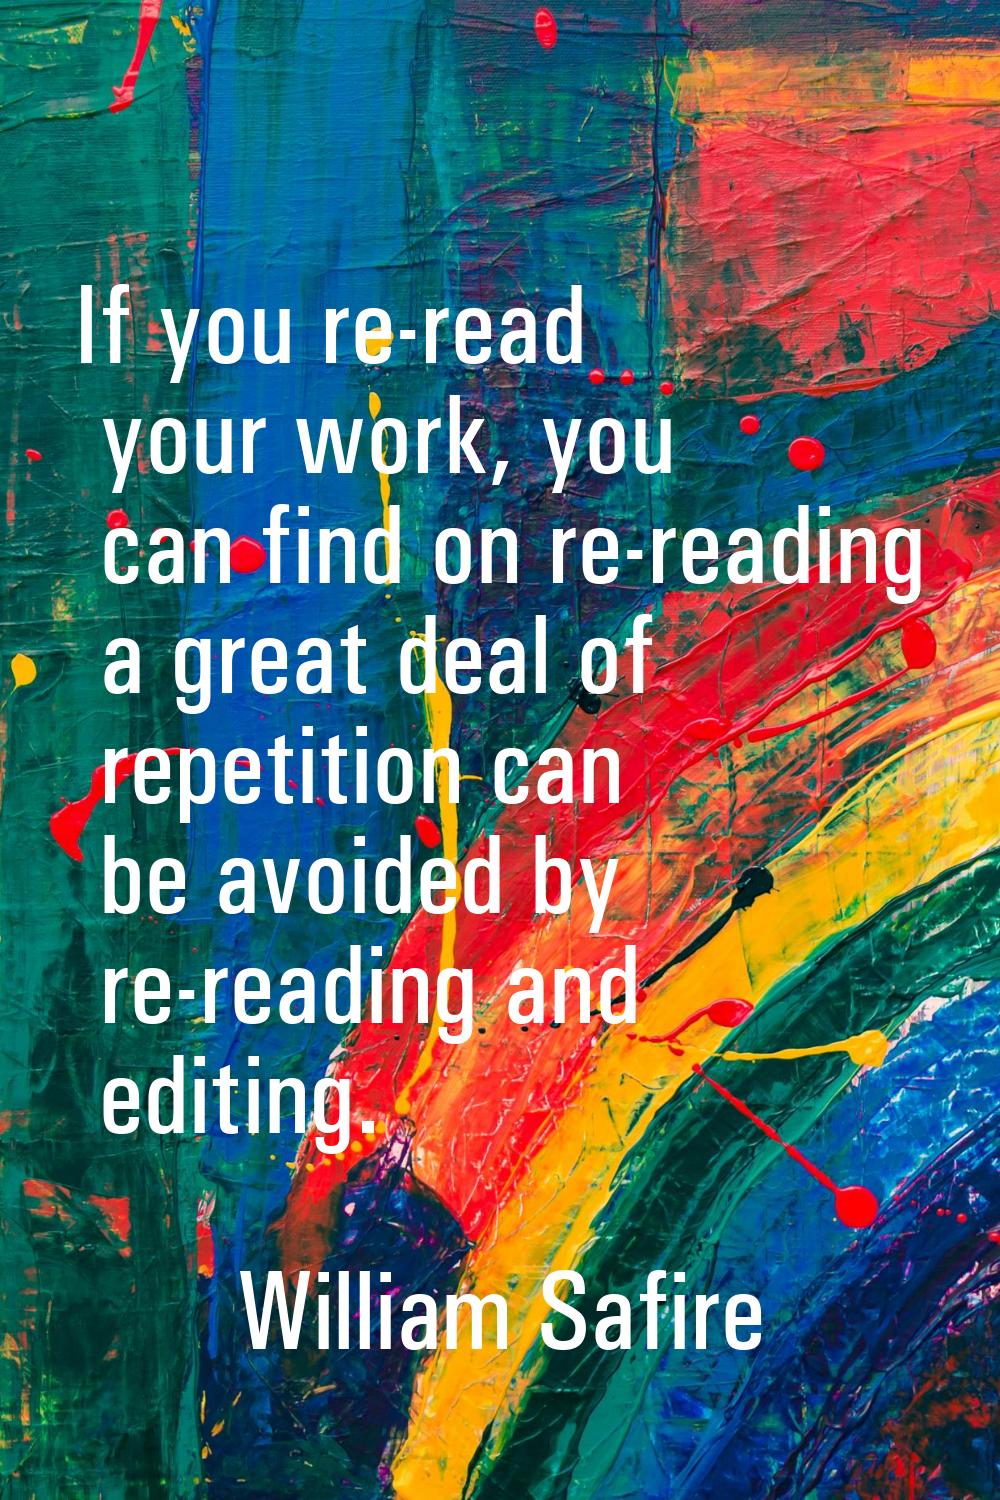 If you re-read your work, you can find on re-reading a great deal of repetition can be avoided by r